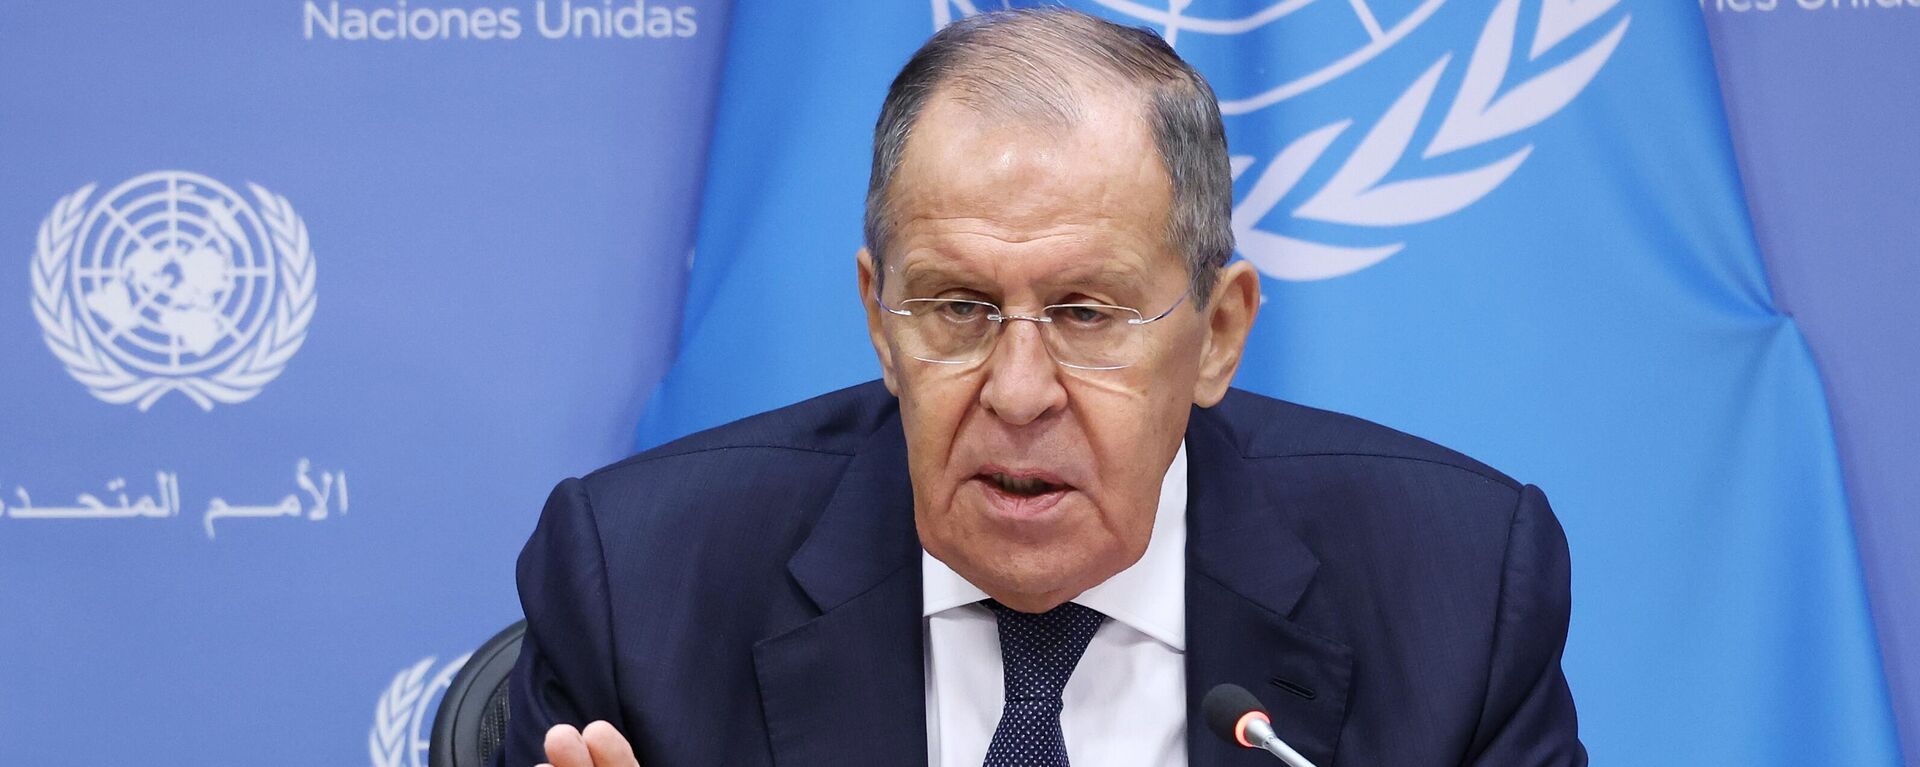 Russia's Foreign Minister Sergey Lavrov reponds to a question during a press conference following his address to the 78th United Nations General Assembly at UN headquarters in New York City on September 23, 2023 - Sputnik Africa, 1920, 21.11.2023